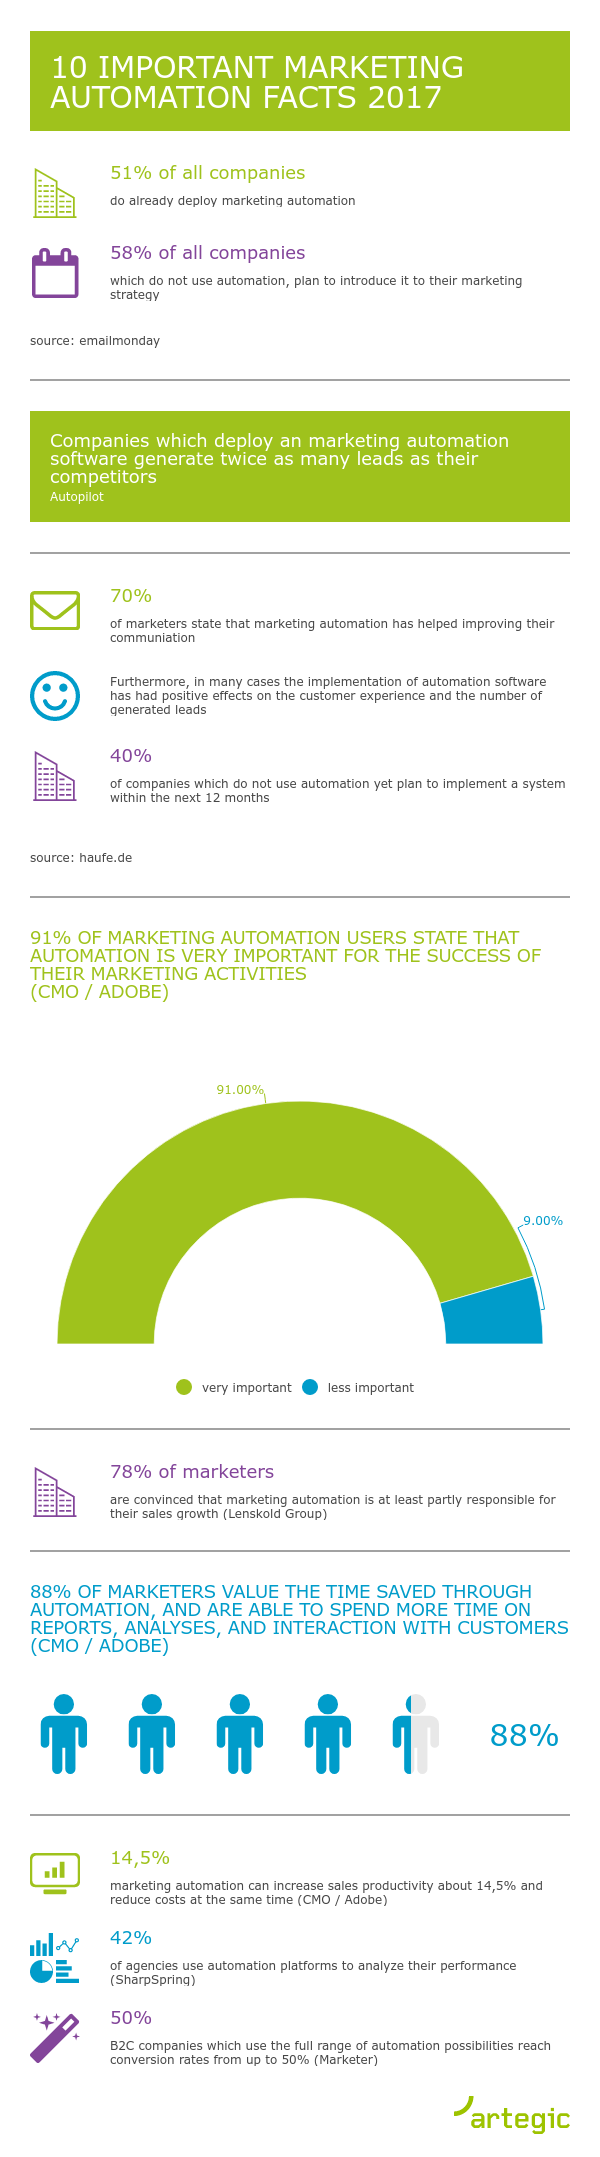 infographic: marketing automation facts 2017